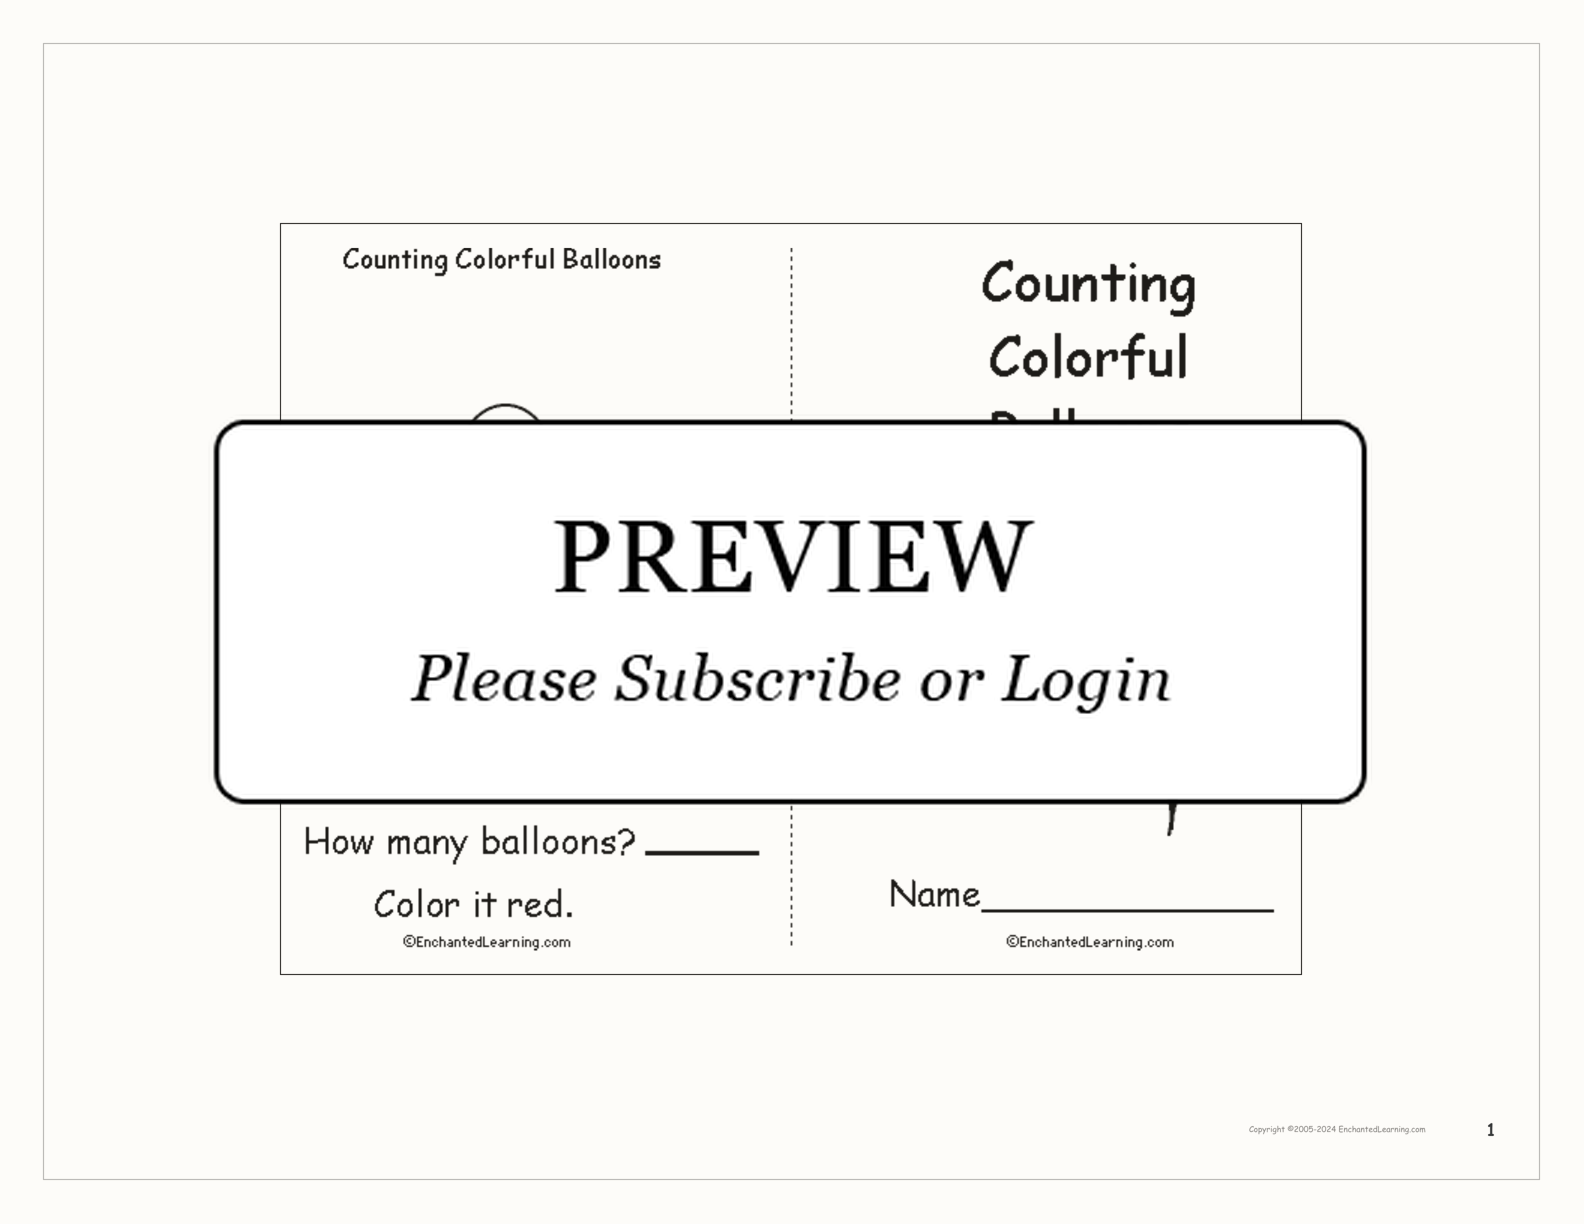 Counting Colorful Balloons Book (1-11) interactive worksheet page 1